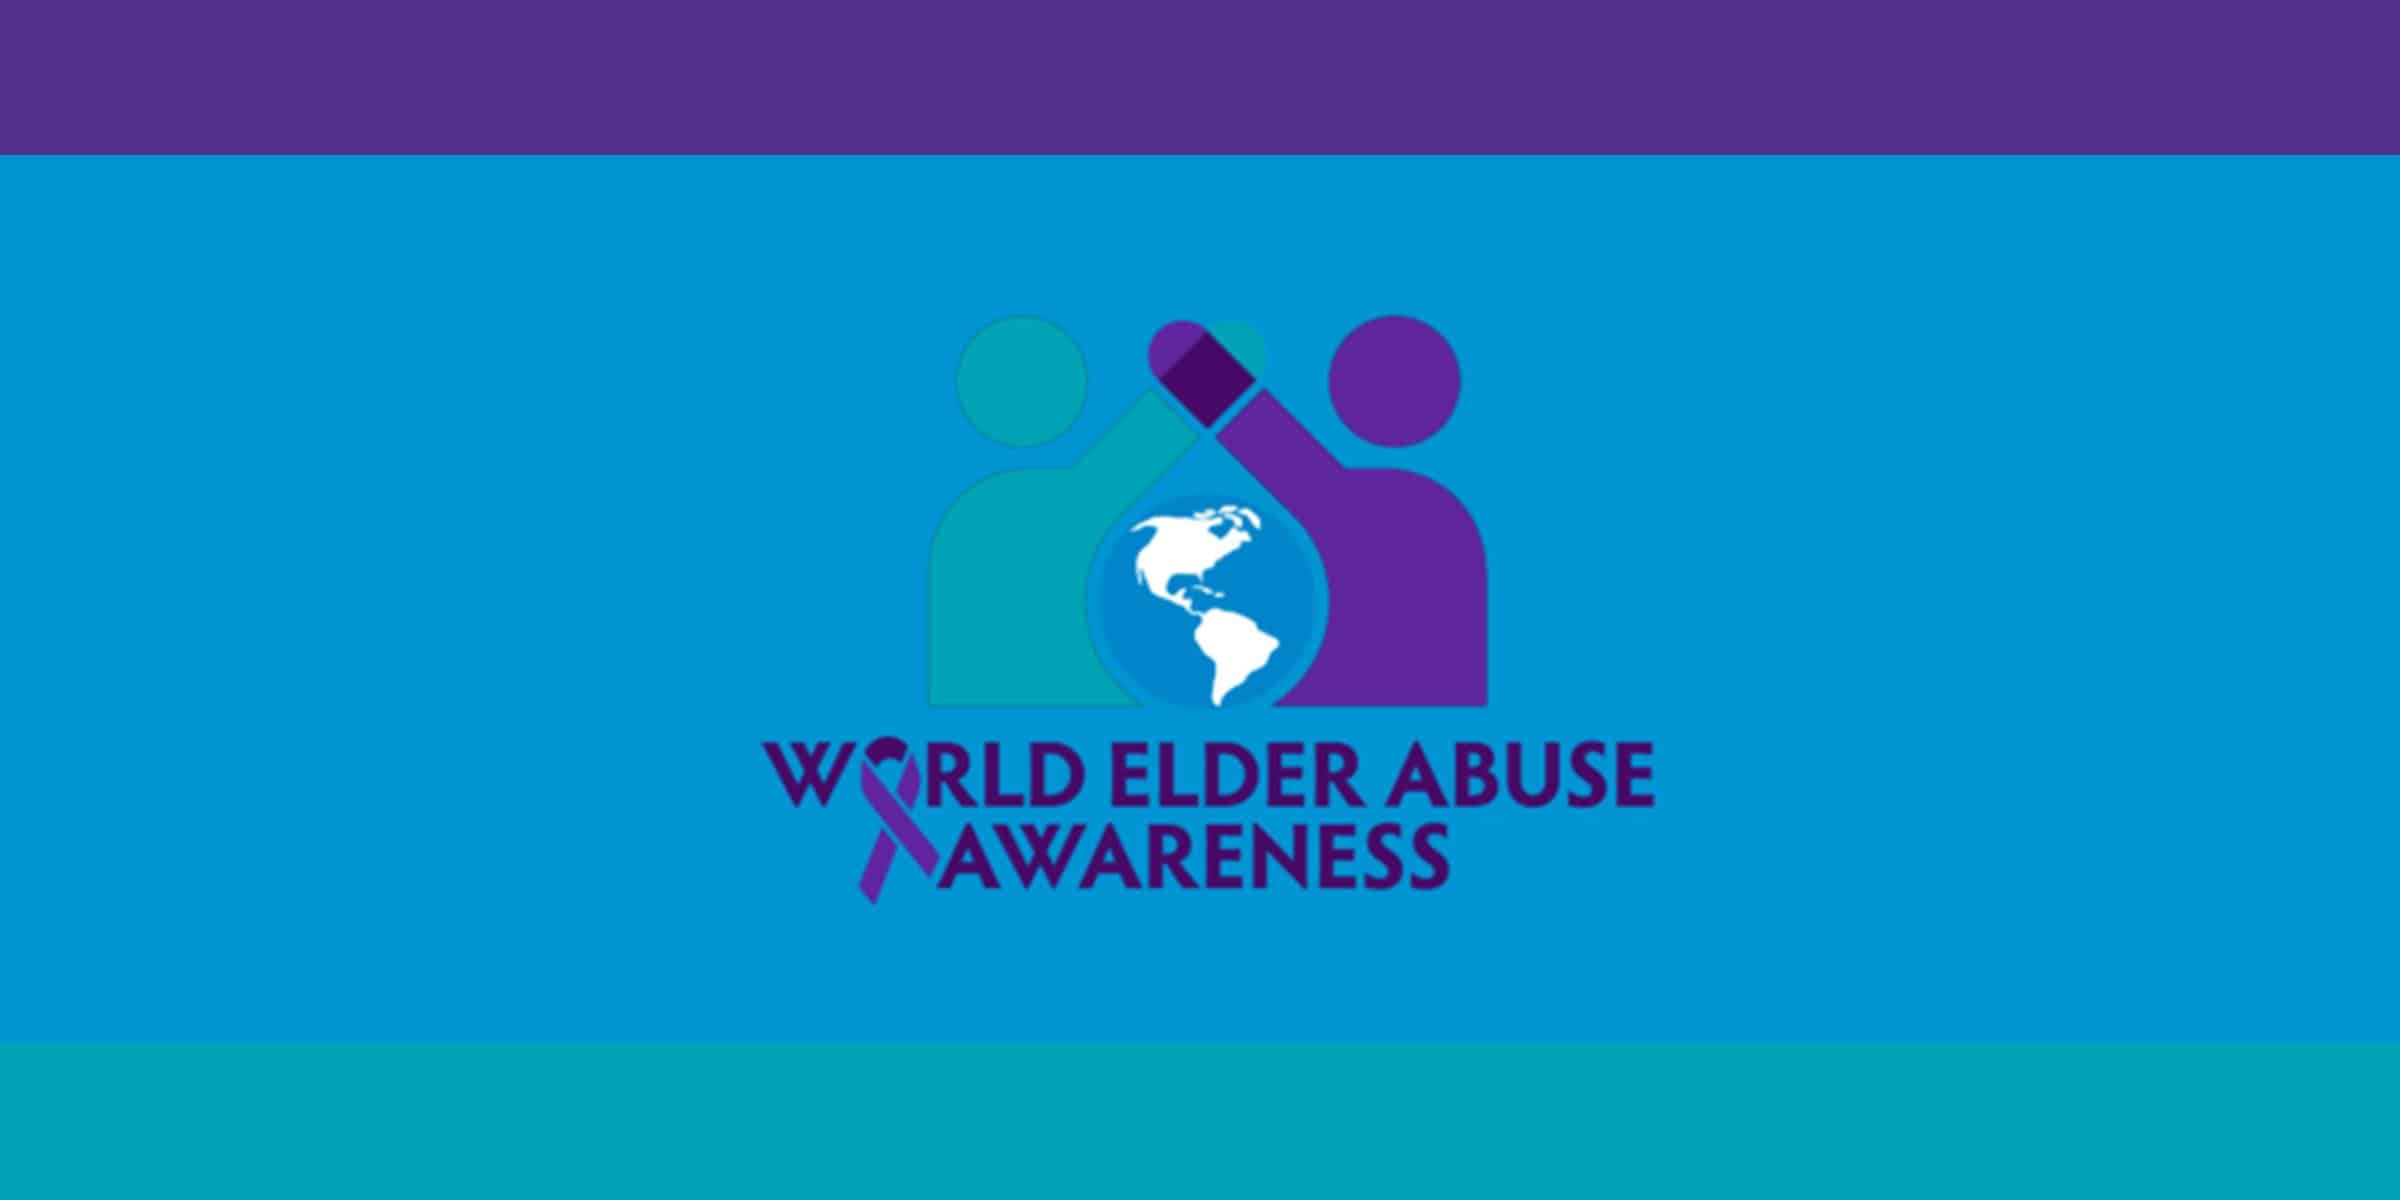 How to identify, report elder abuse and neglect, and raise awareness to end these tragic cases